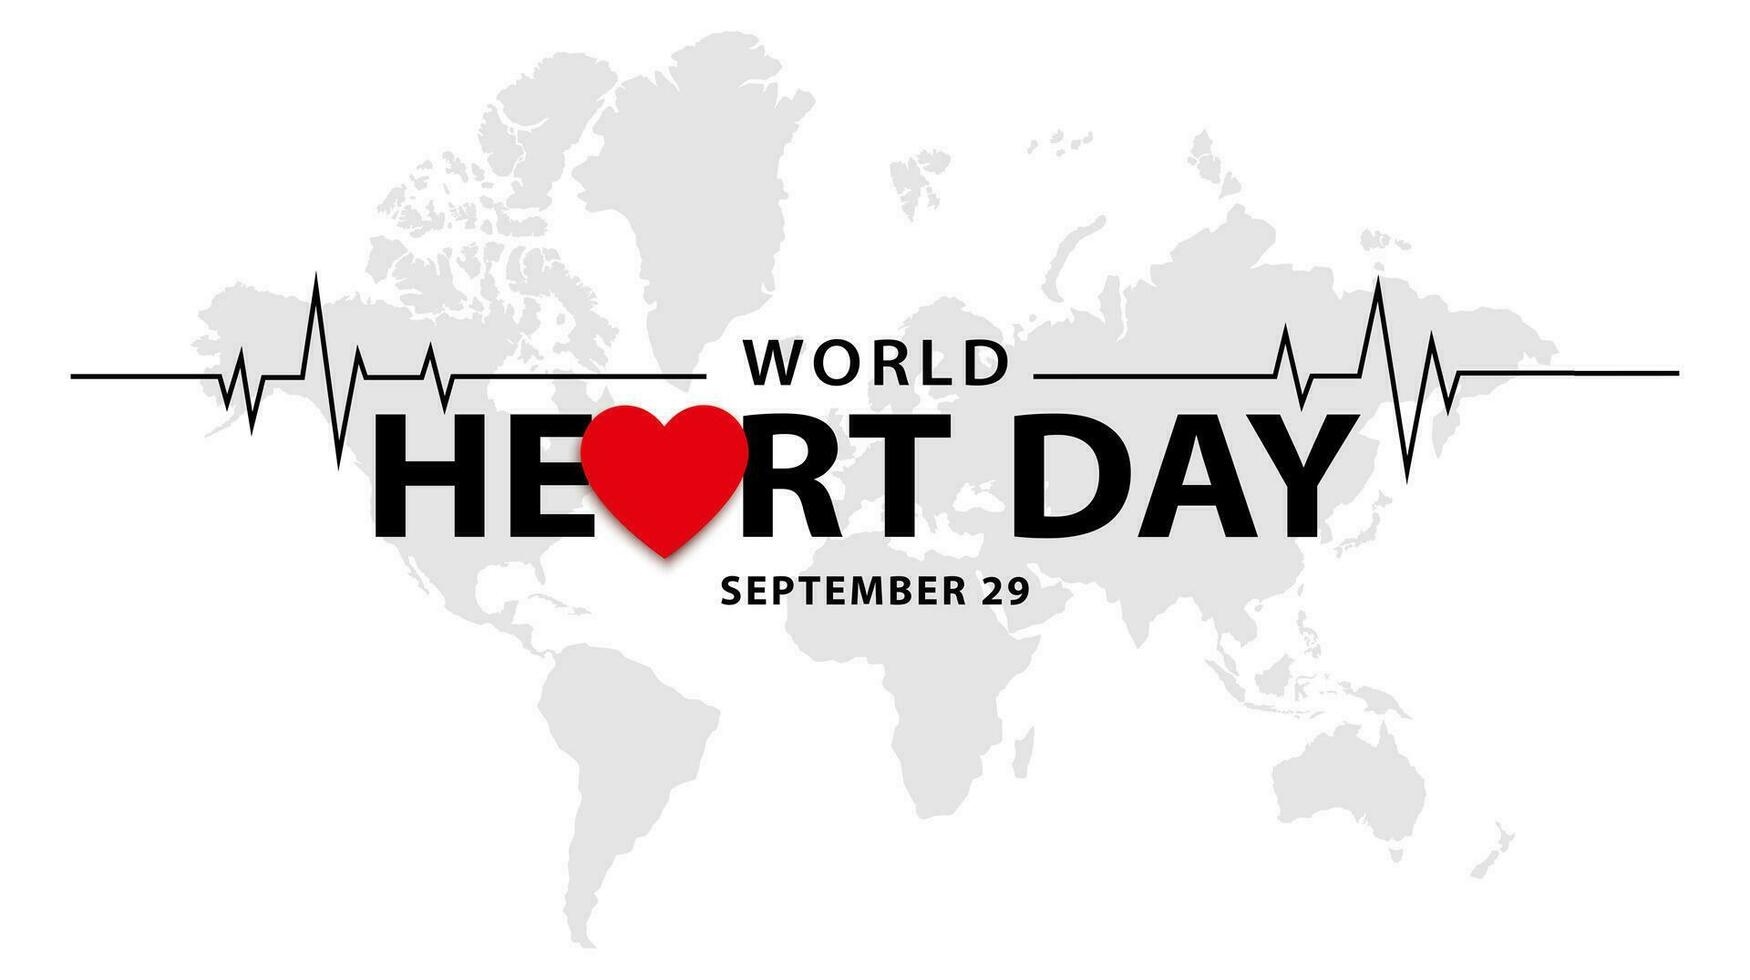 World Heart Day design, September 29. Health care concept background with world map. Vector illustration